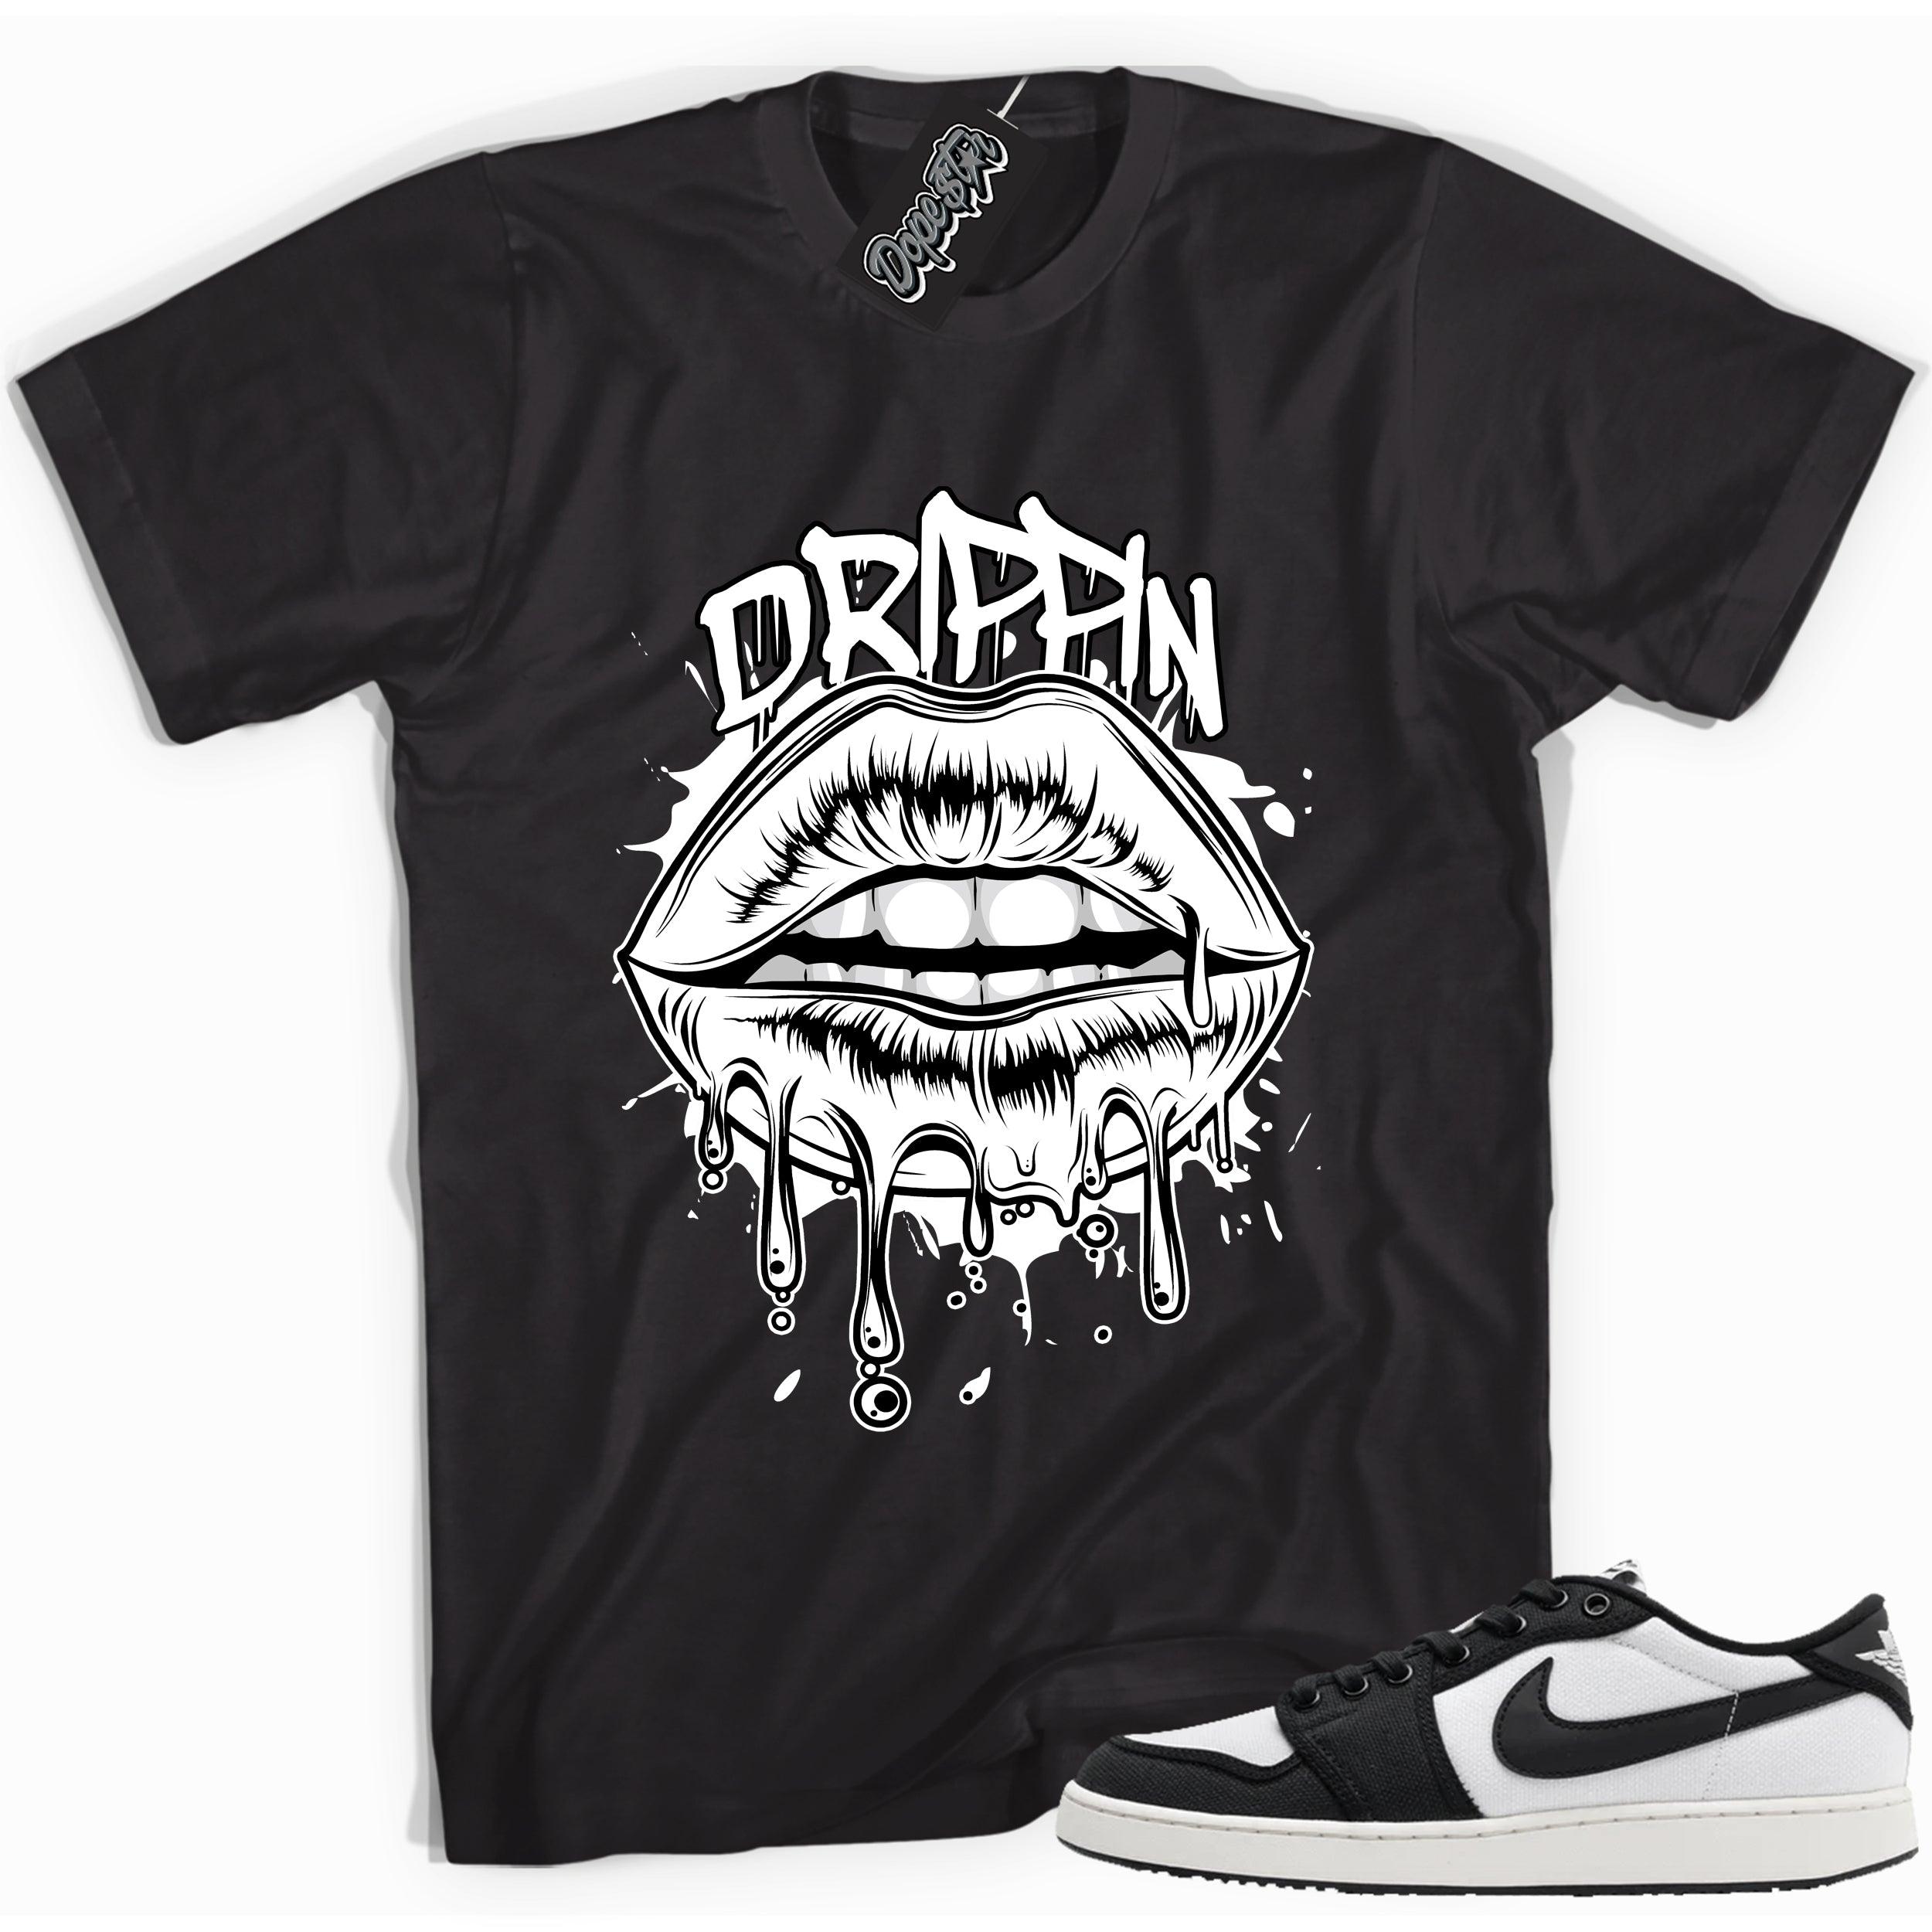 Cool black graphic tee with 'drippin' print, that perfectly matches Air Jordan 1 Retro Ajko Low Black & White sneakers.